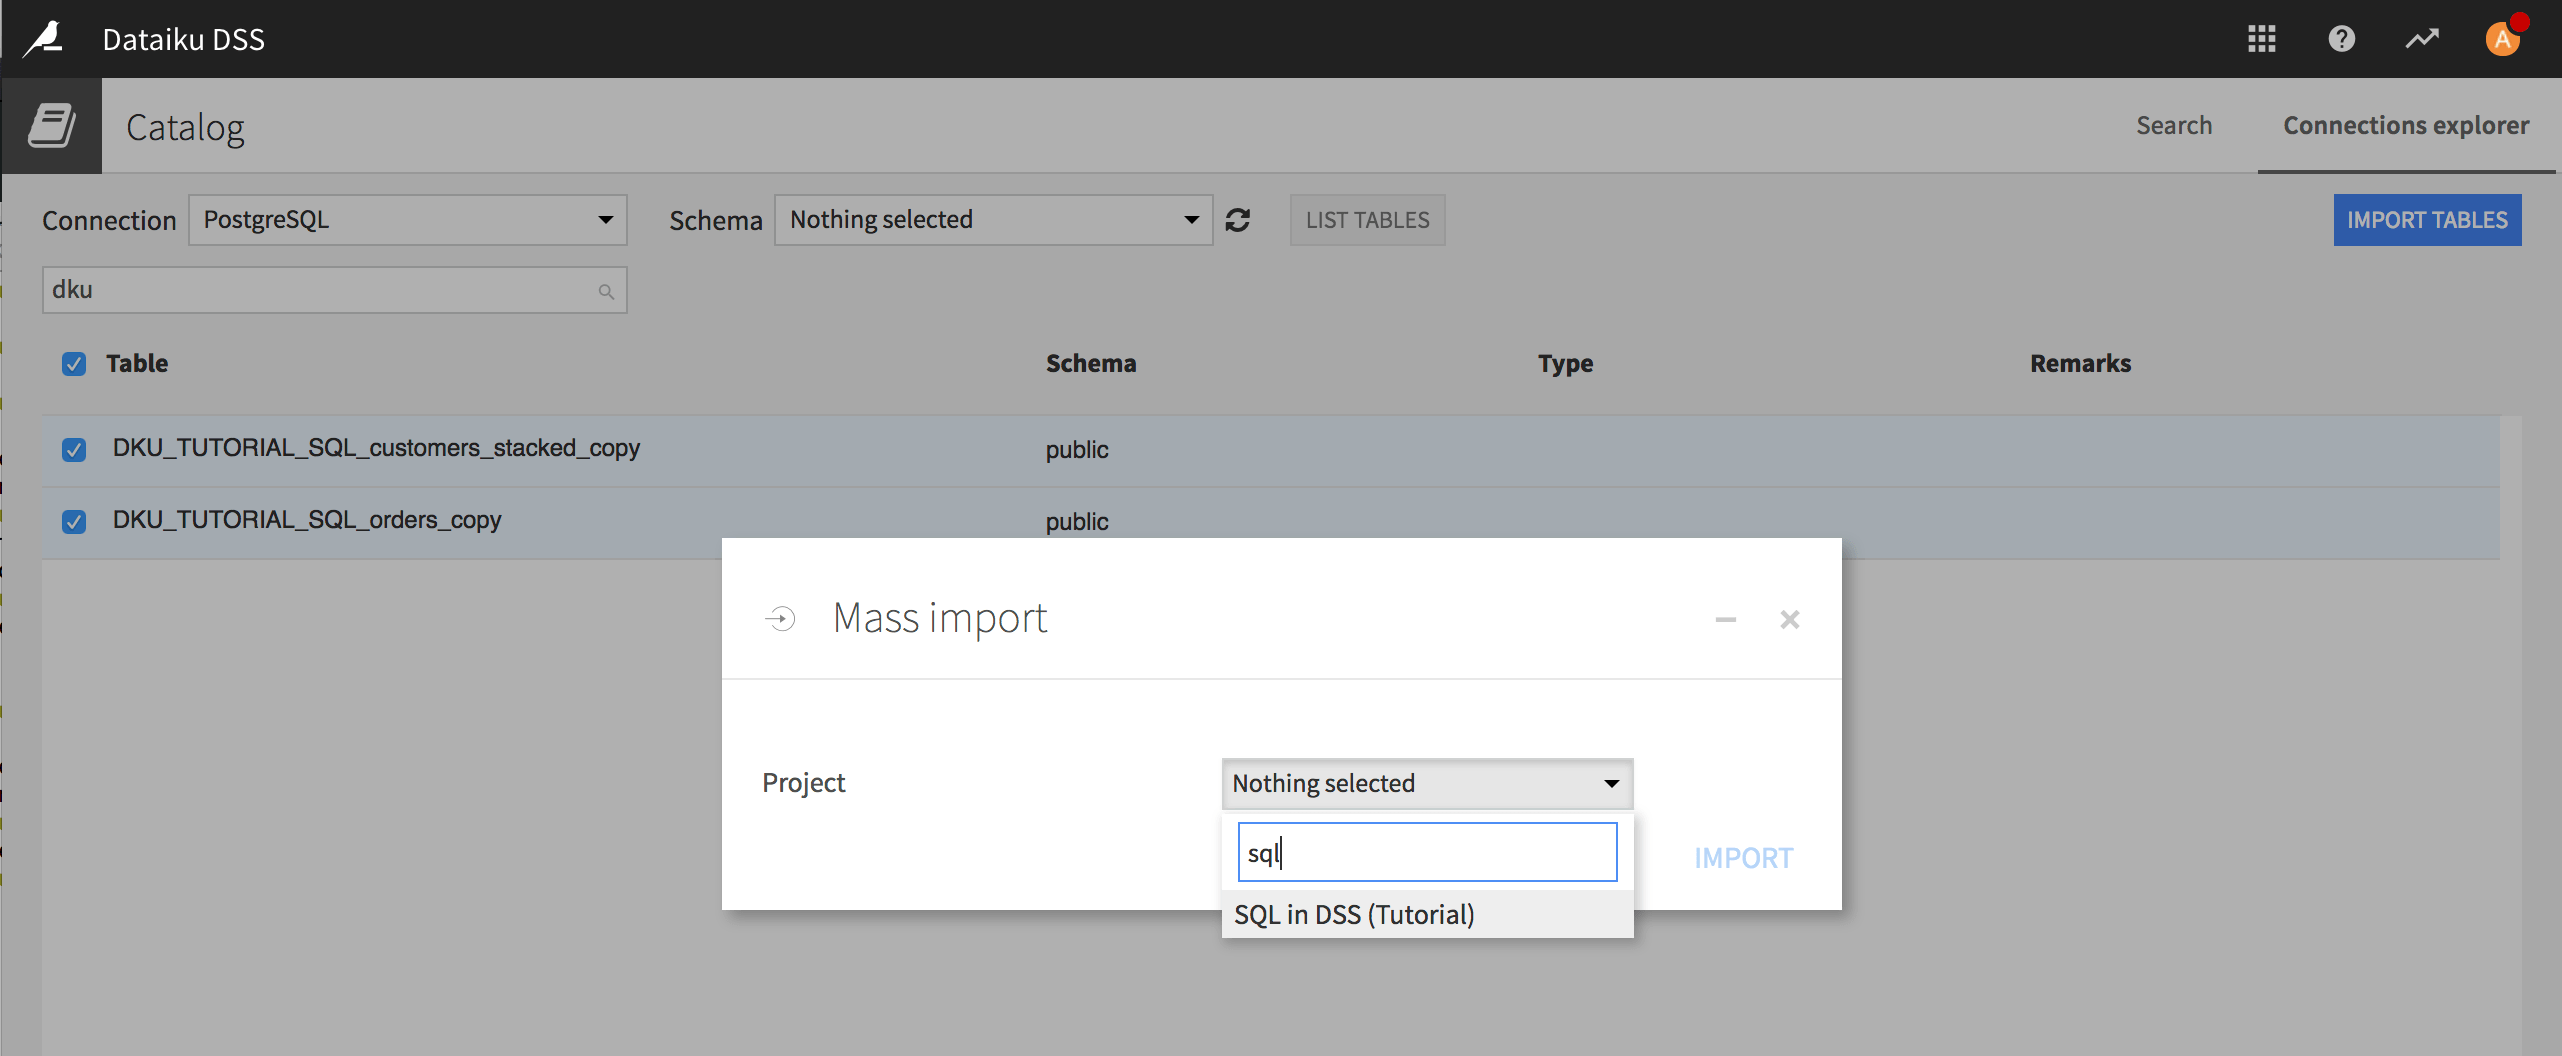 You can mass import tables after creating the SQL connection.